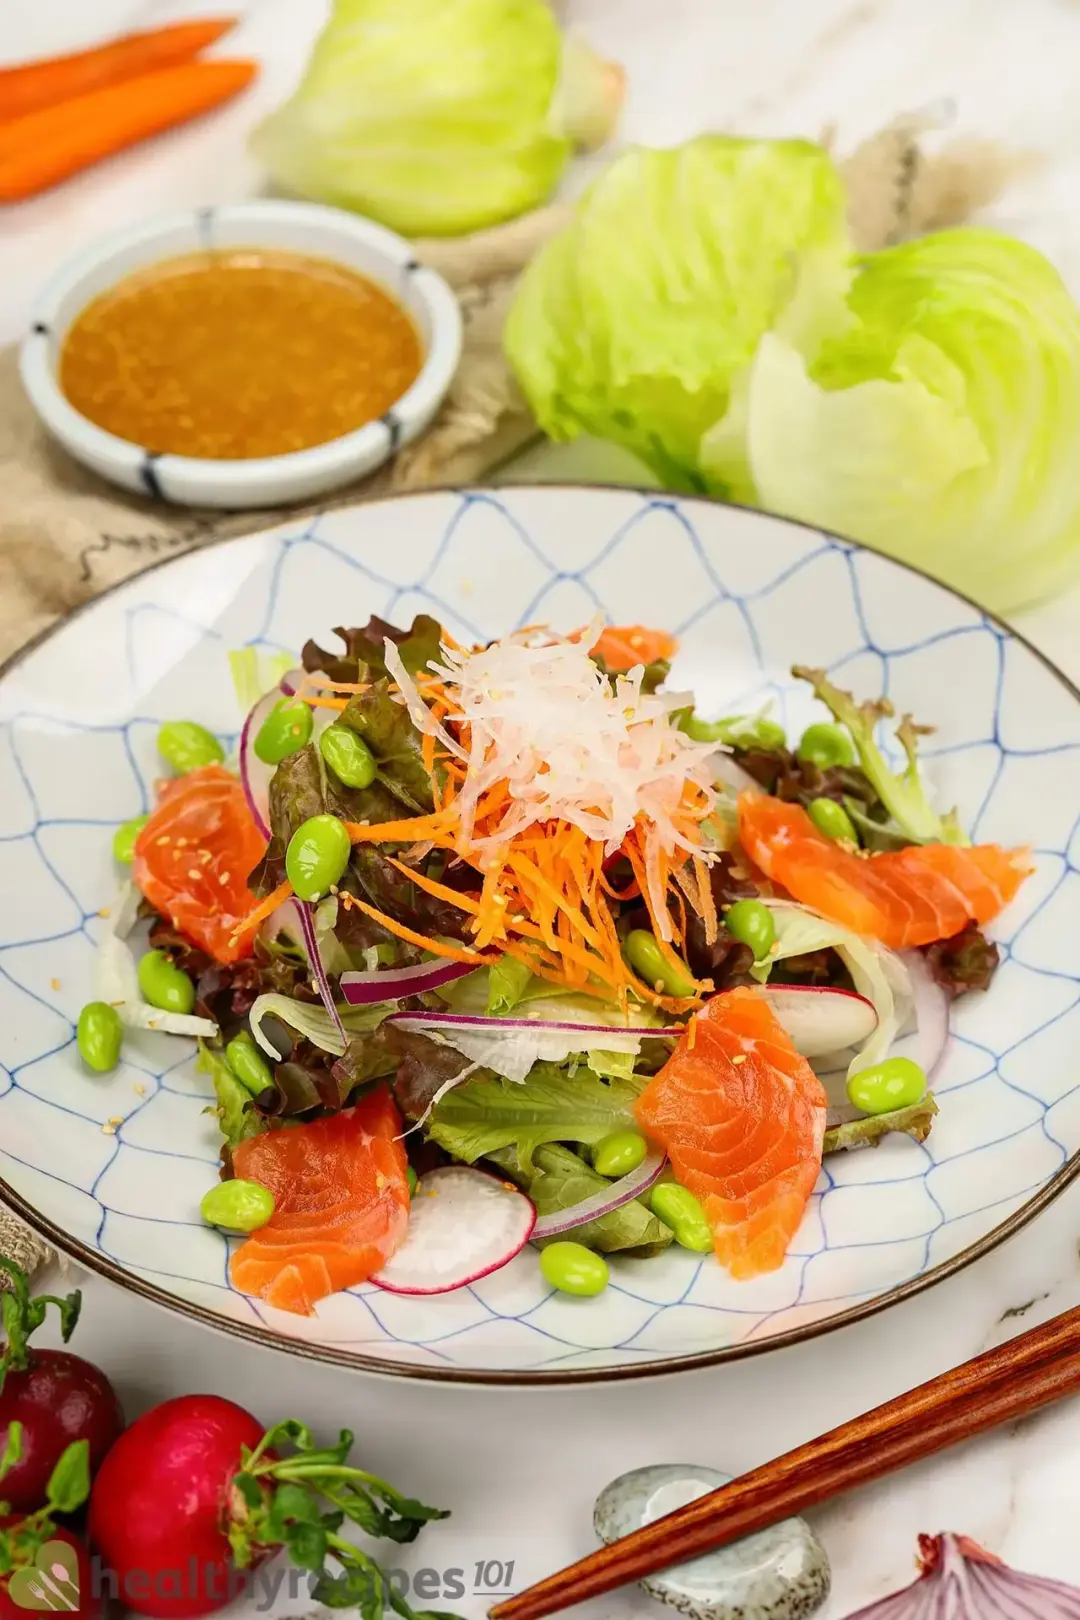 A close-up shot of a plate of Japanese salmon salad next to a bowl of dressing, a pair of chopsticks, radish, carrots, and cabbage